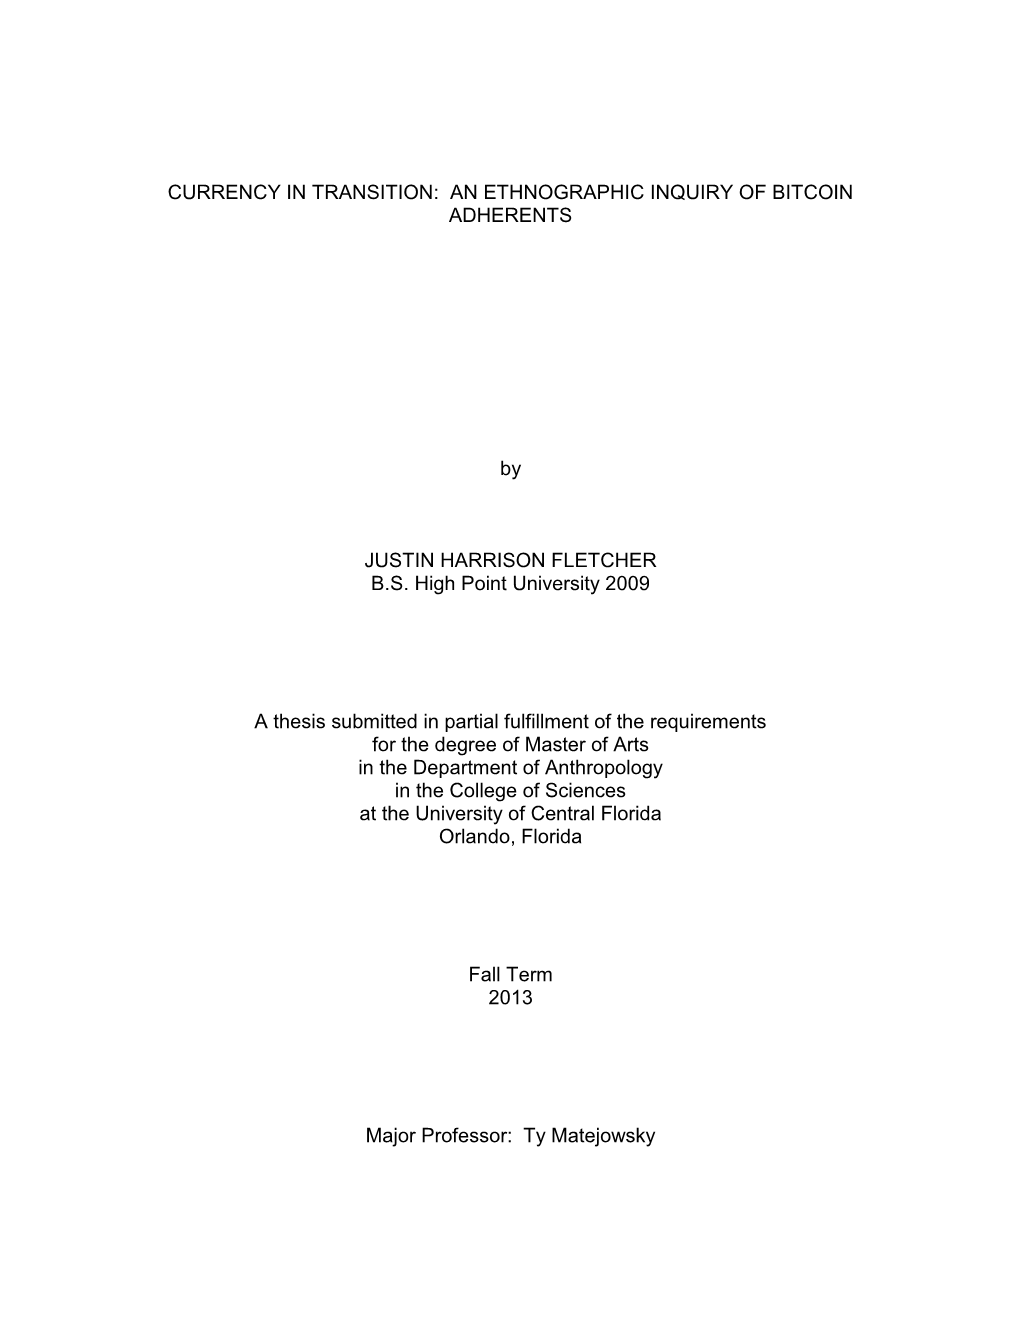 Currency in Transition: an Ethnographic Inquiry of Bitcoin Adherents